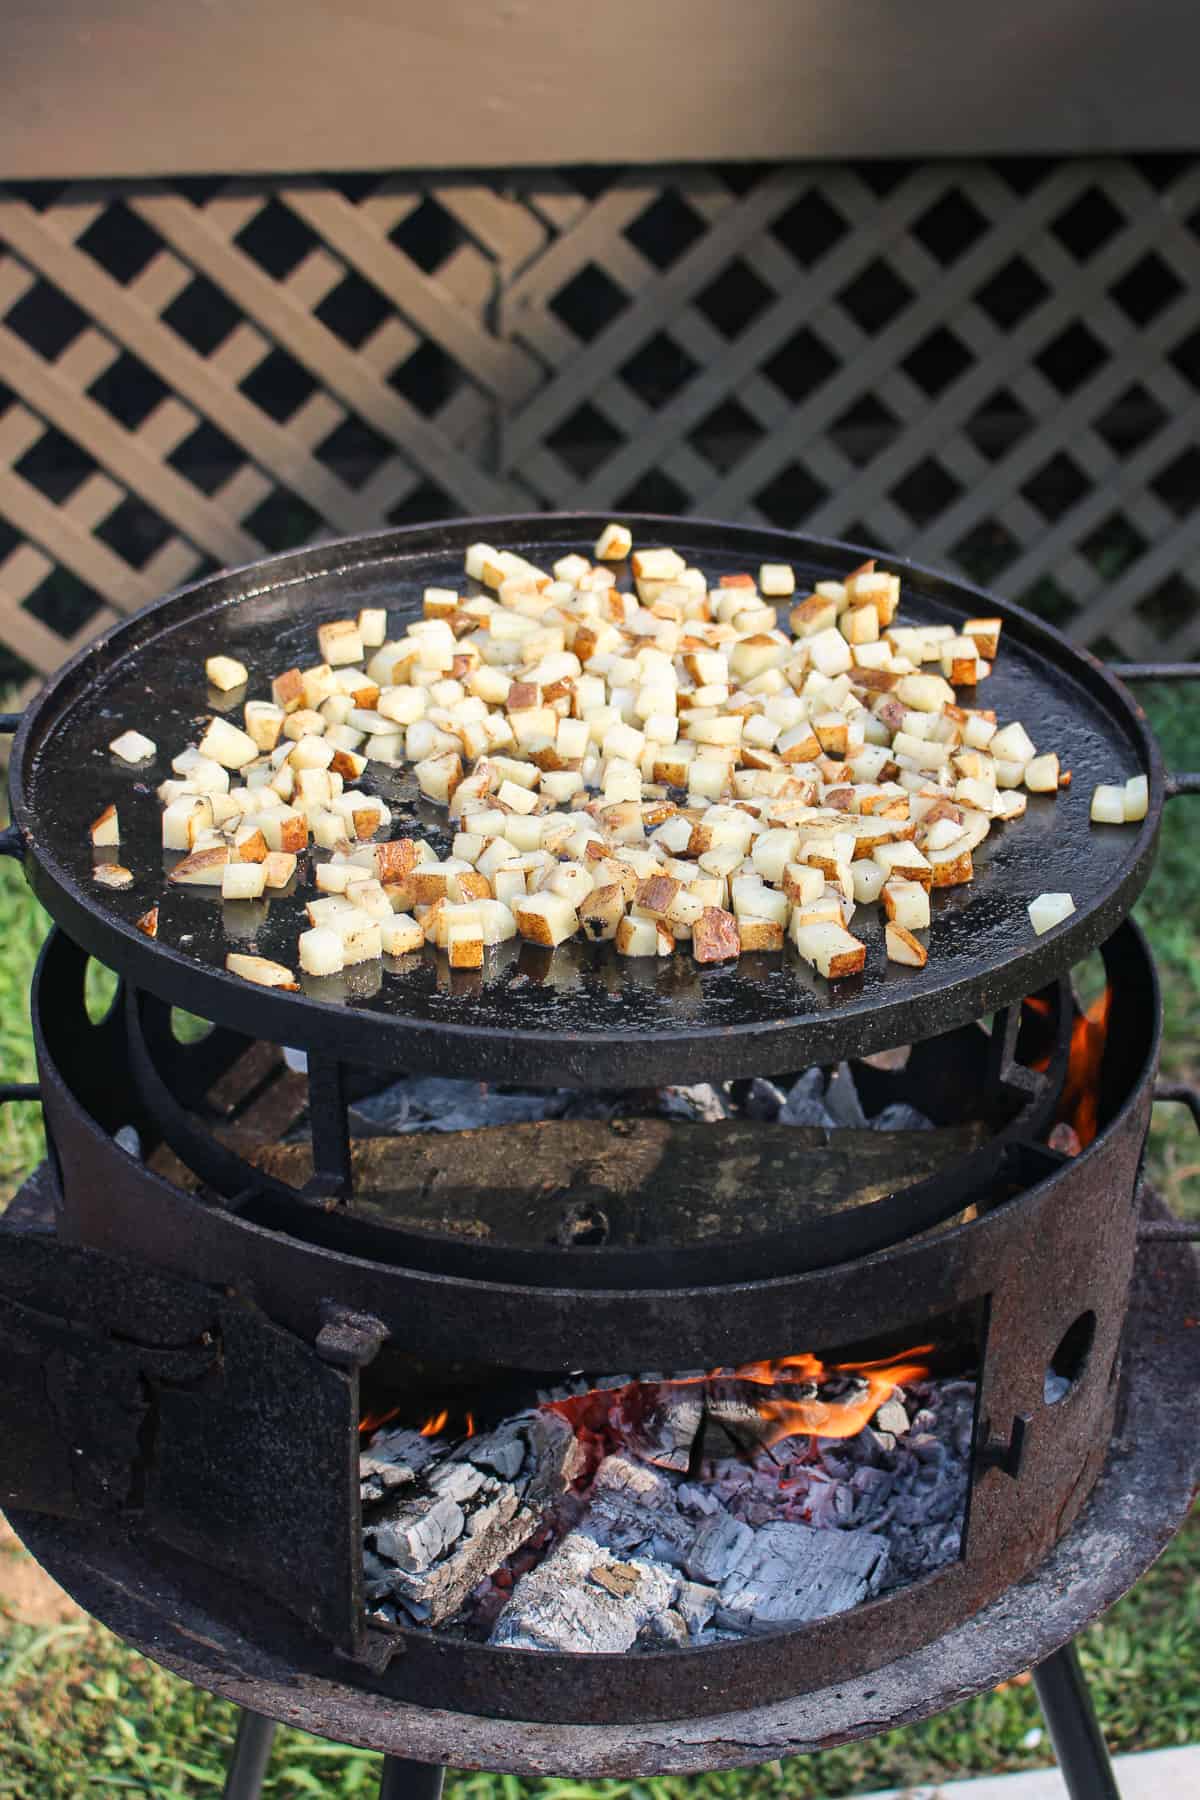 diced potatoes being cooked on a plancha on the grill